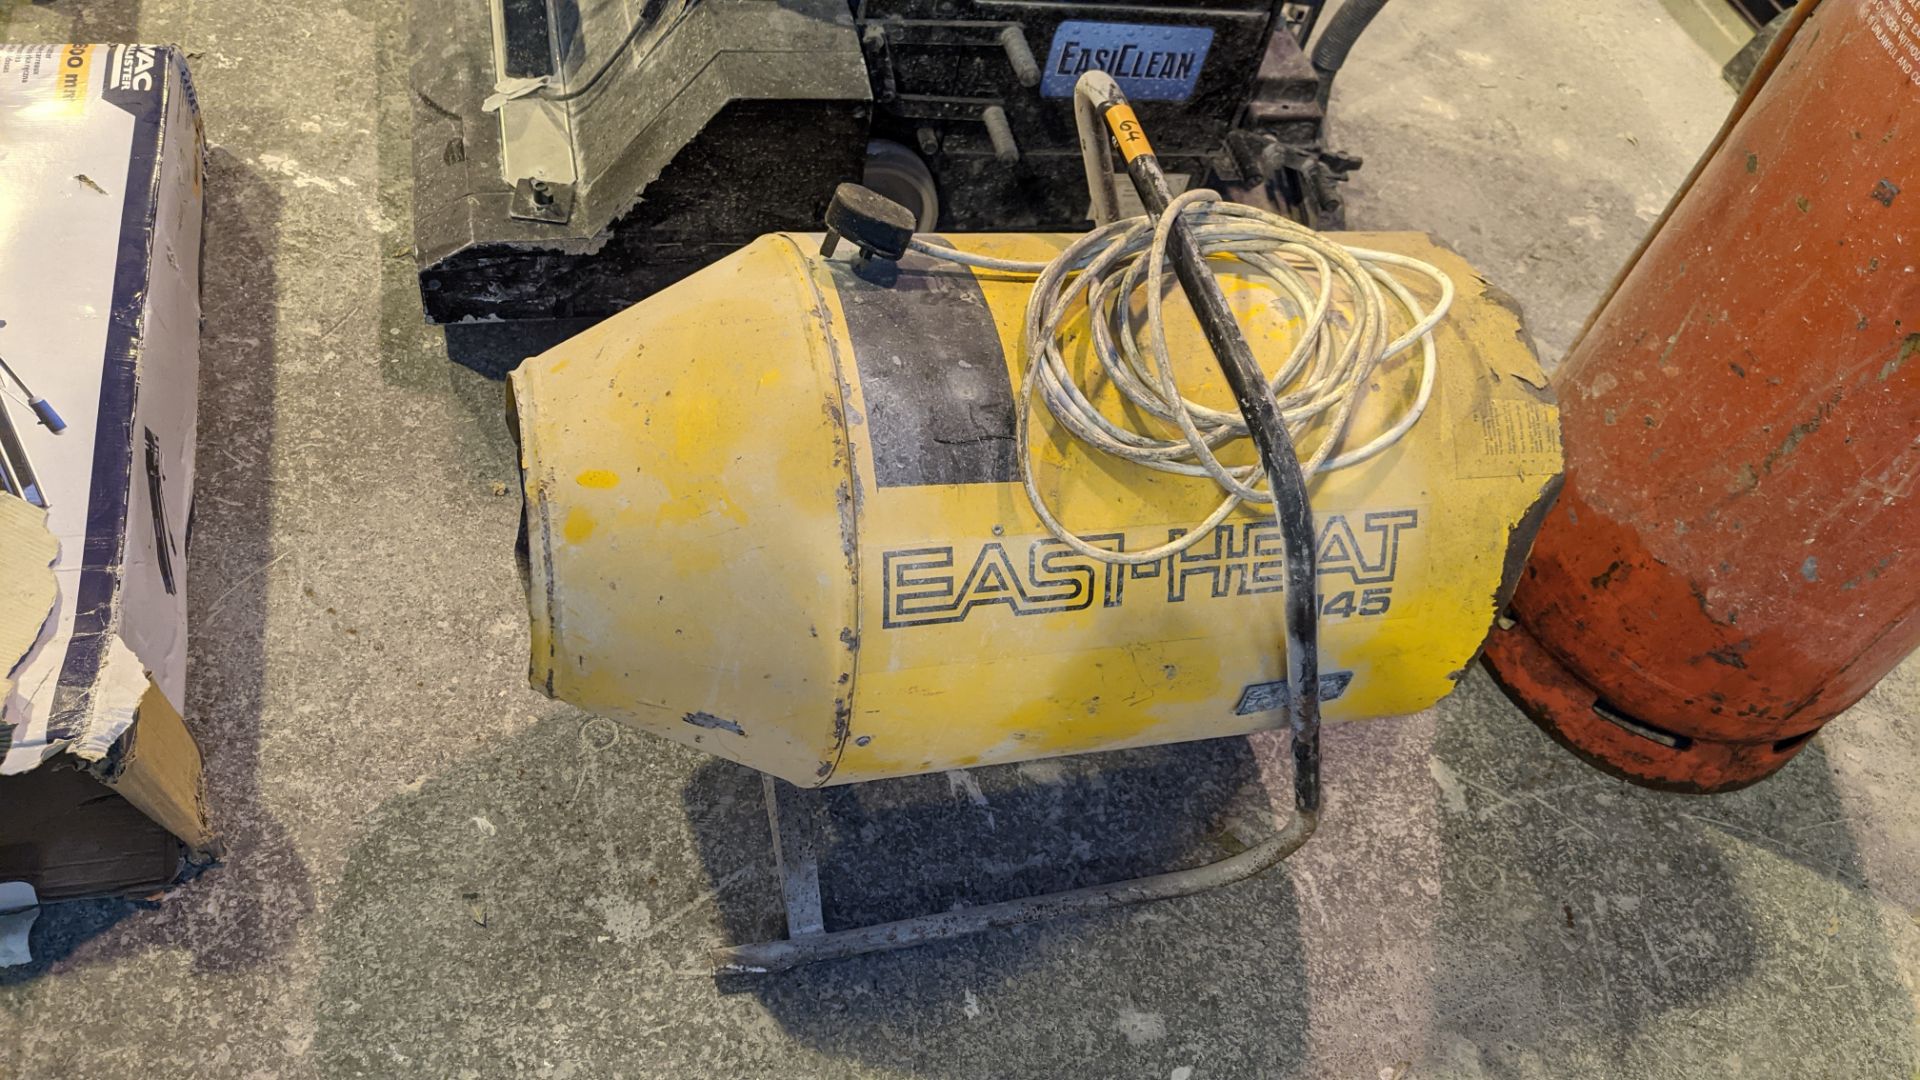 Easi-Heat model 145 industrial space heater NB. Hose appears to be bolted to gas bottle (which appea - Image 3 of 5